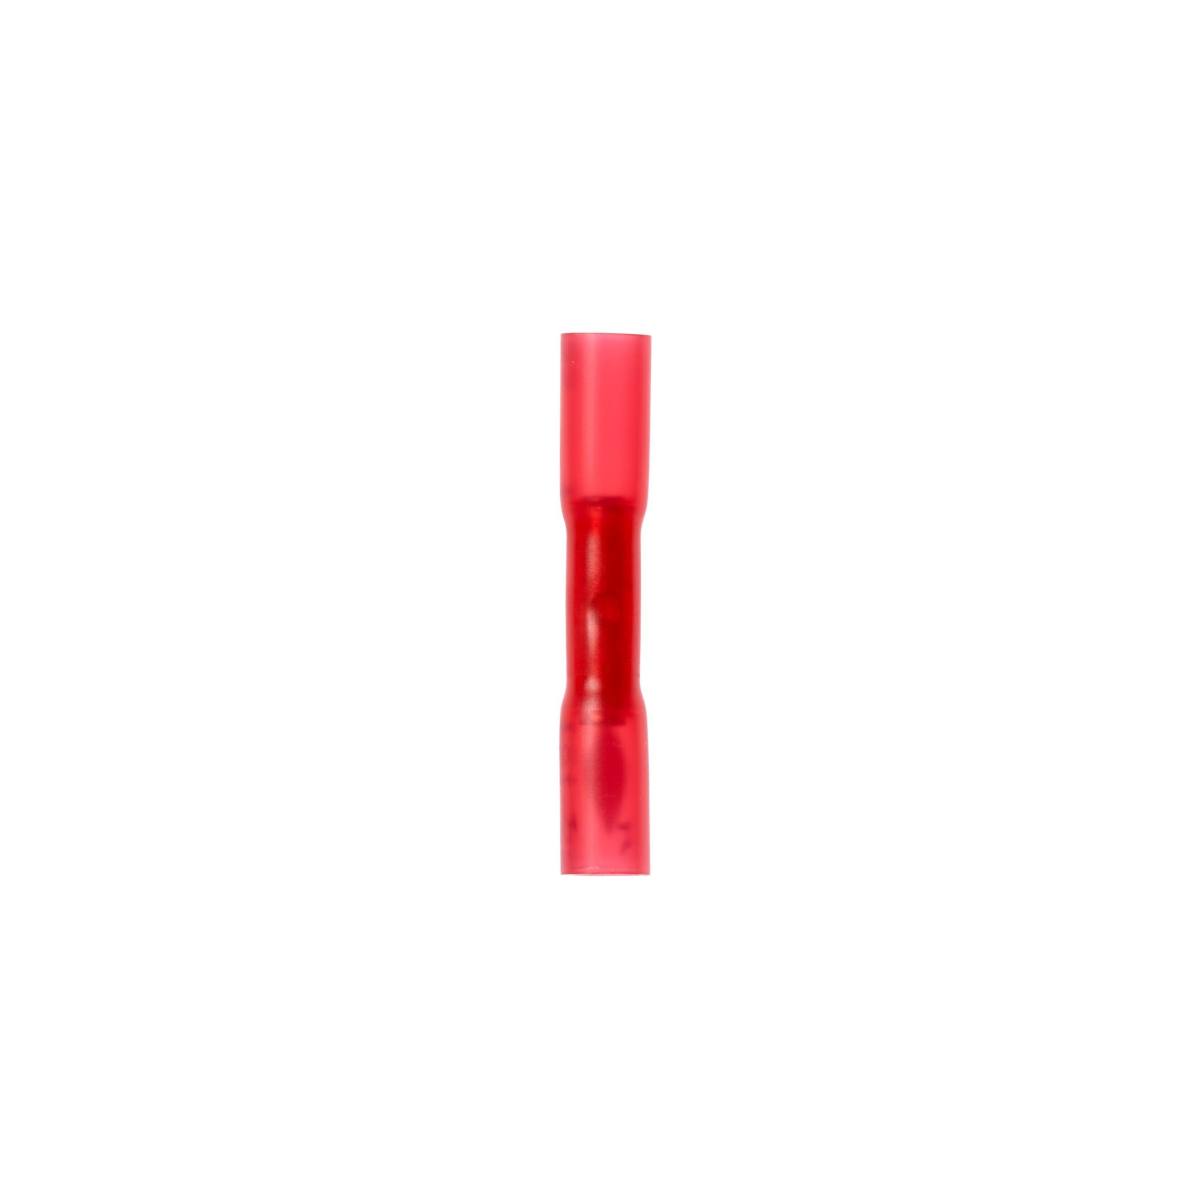 3M Scotchlok MH18BCX Heat-shrink compression connector, red, 600 V, max. 4 - 6 mmÂ², 25 pieces / pack